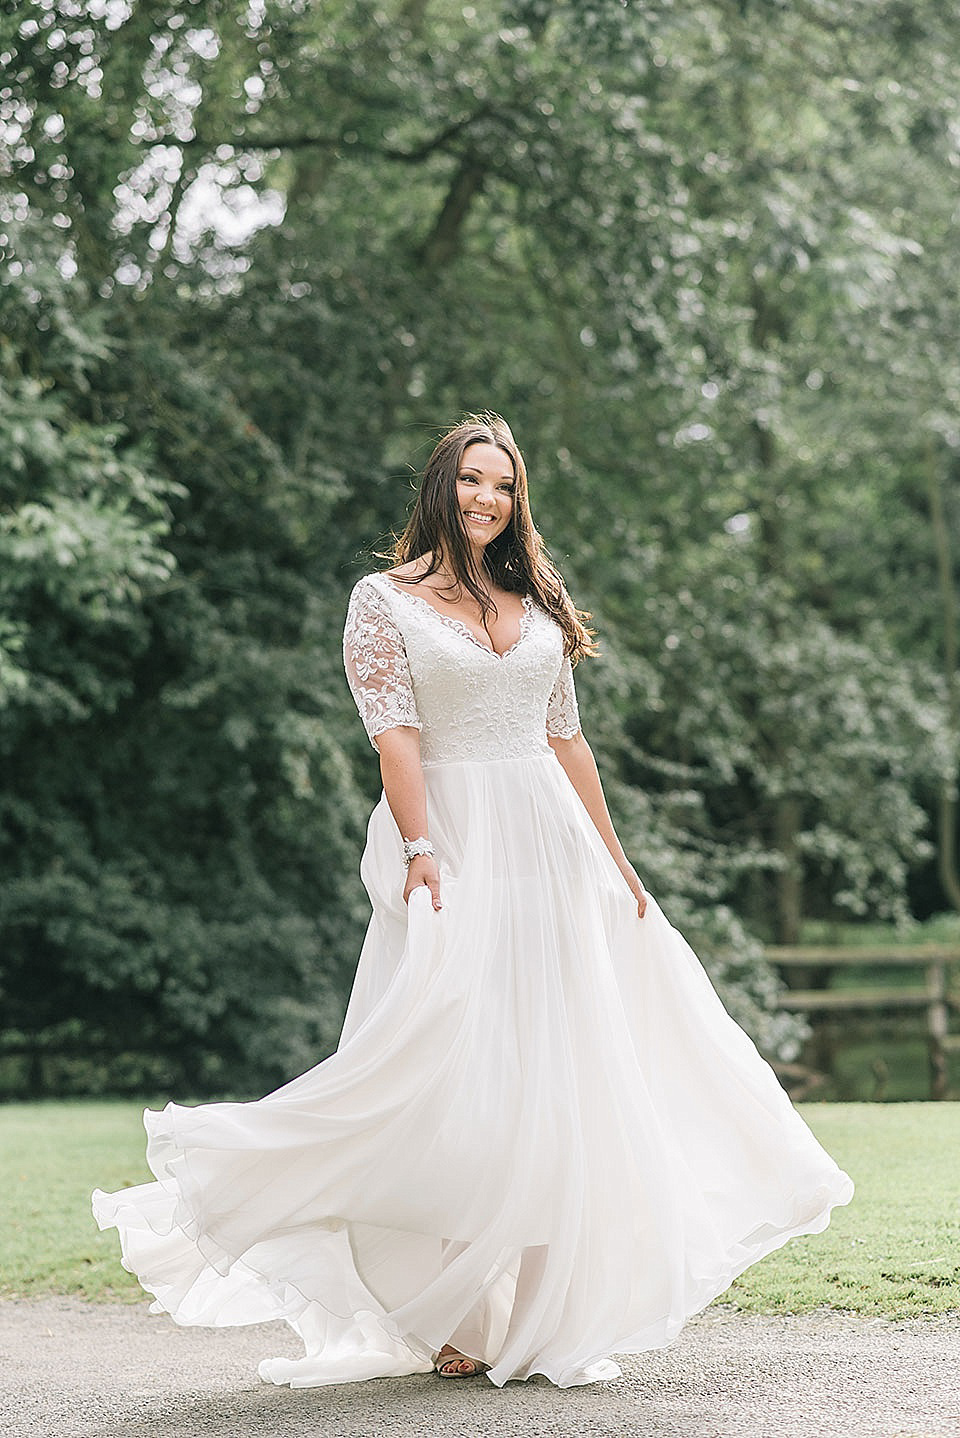 Charlotte Balbier and Sassi Holford are both stocked at The Little Pearl Bridal Boutique in Pickering, North Yorkshire. Photography by Georgina Harrison.